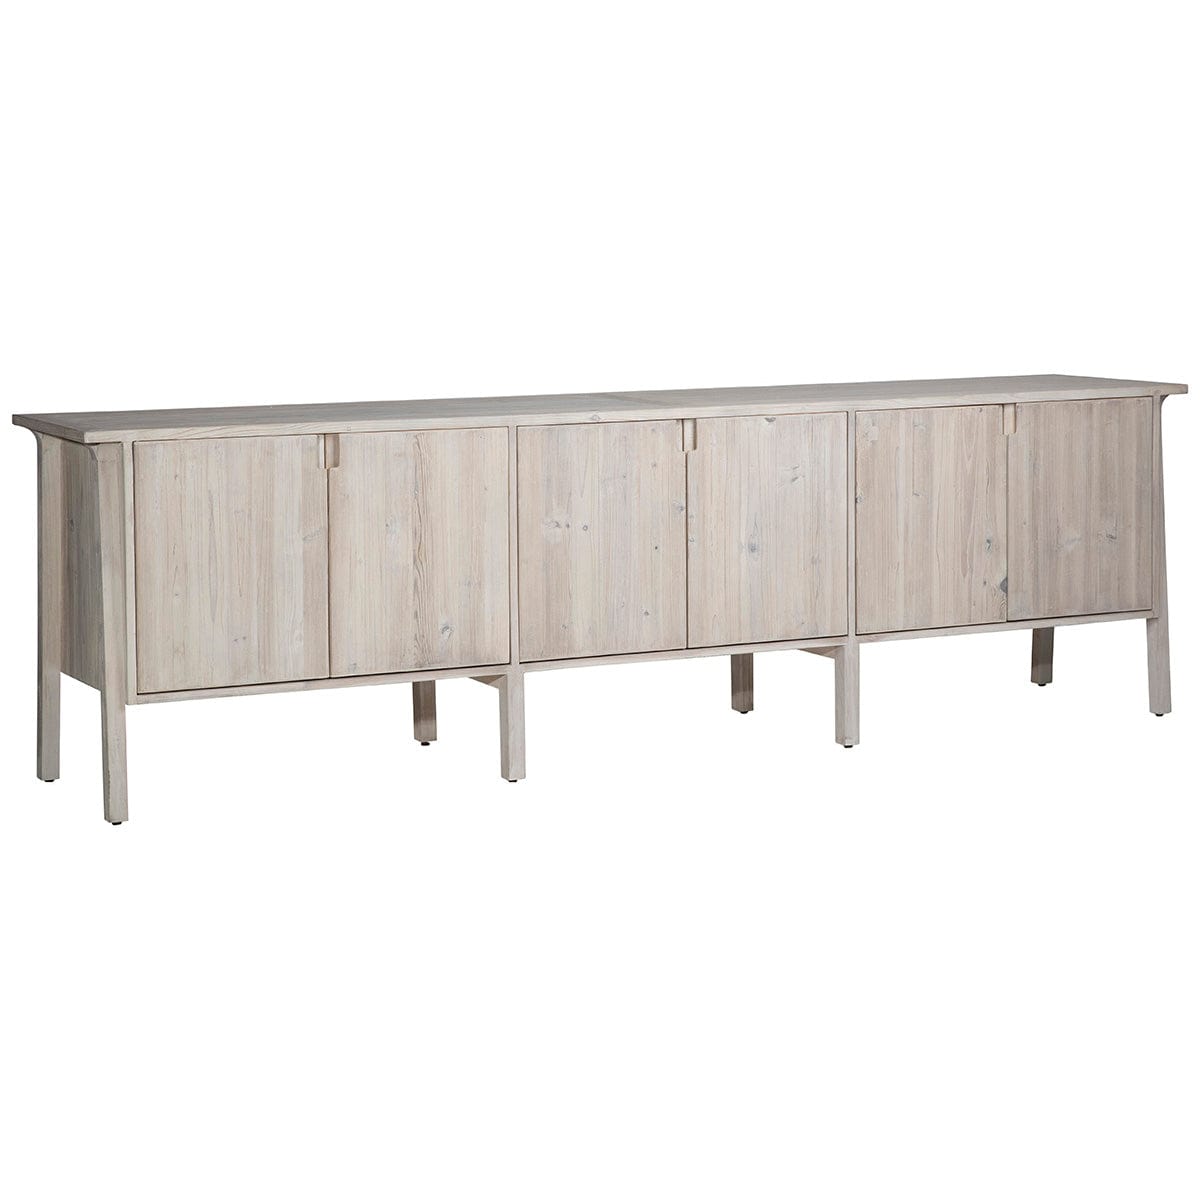 Dovetail Torre Sideboard Buffets & Sideboards dovetail-DOV50065